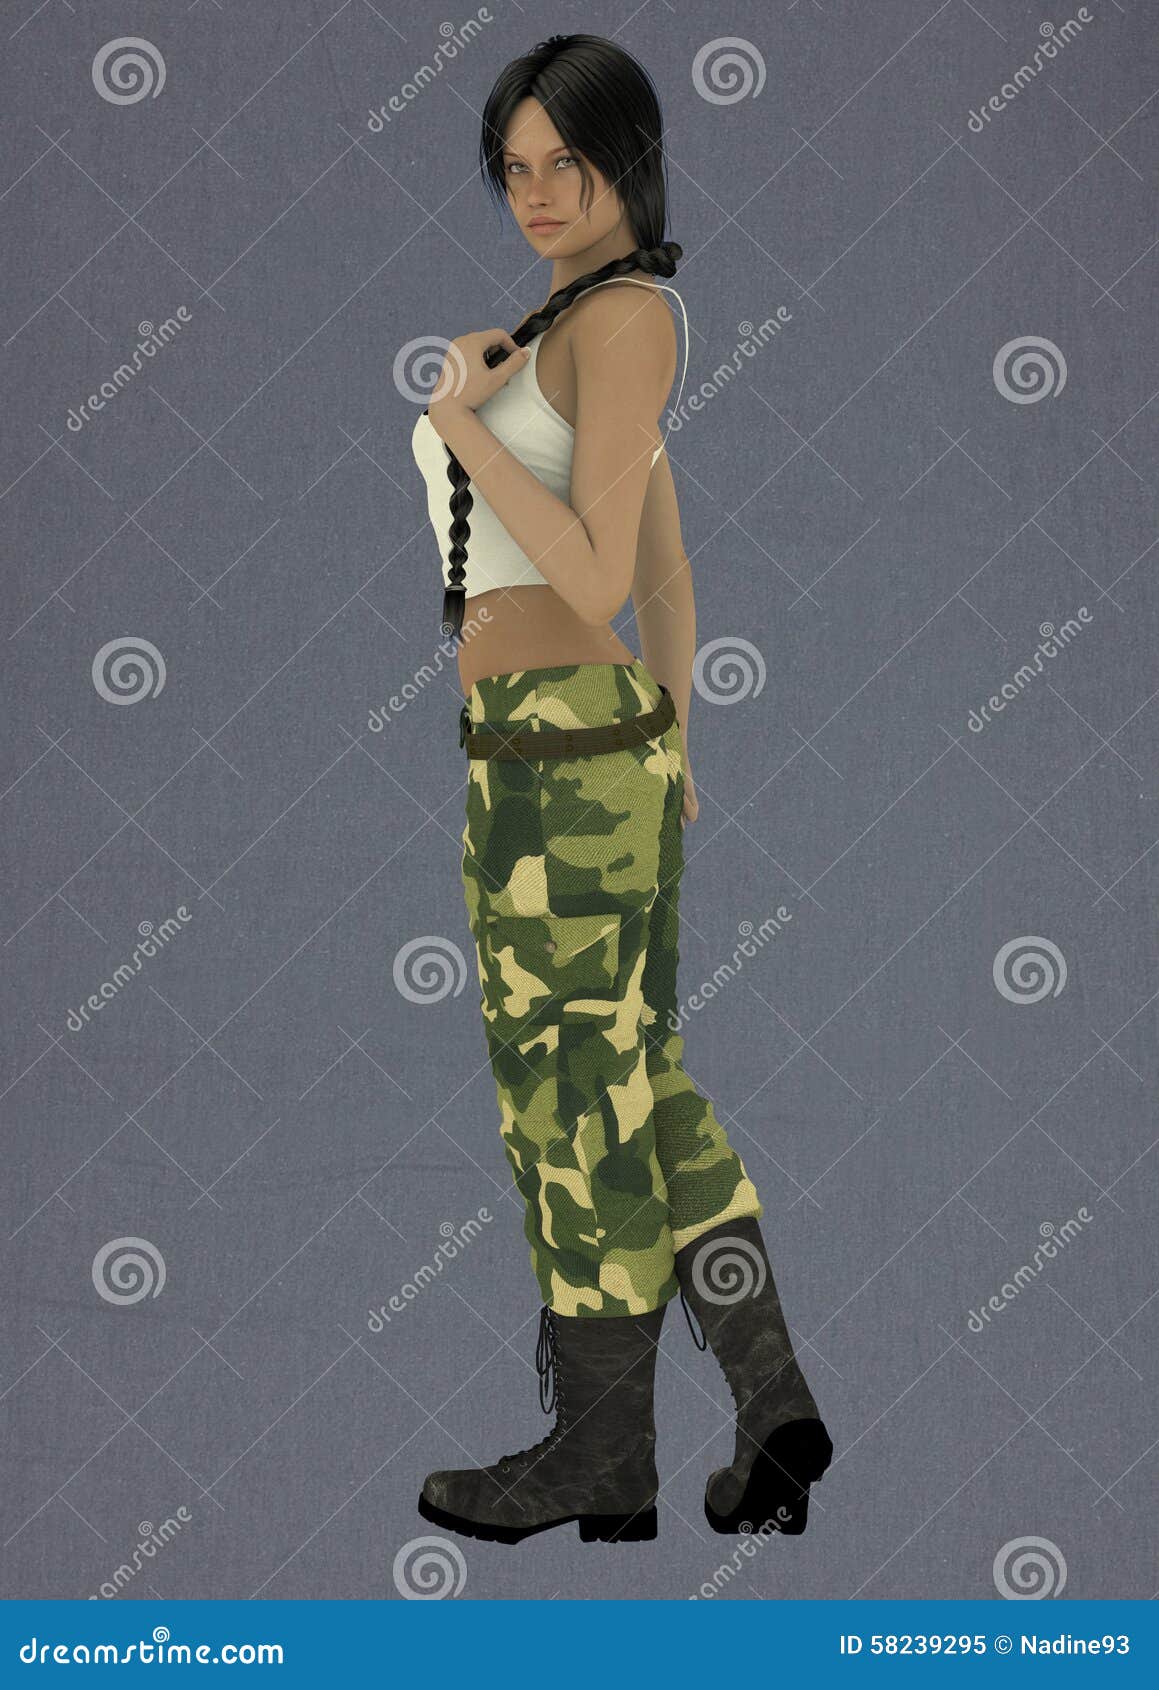 Female Lin The Army Stock Illustration Illustration Of Army 58239295